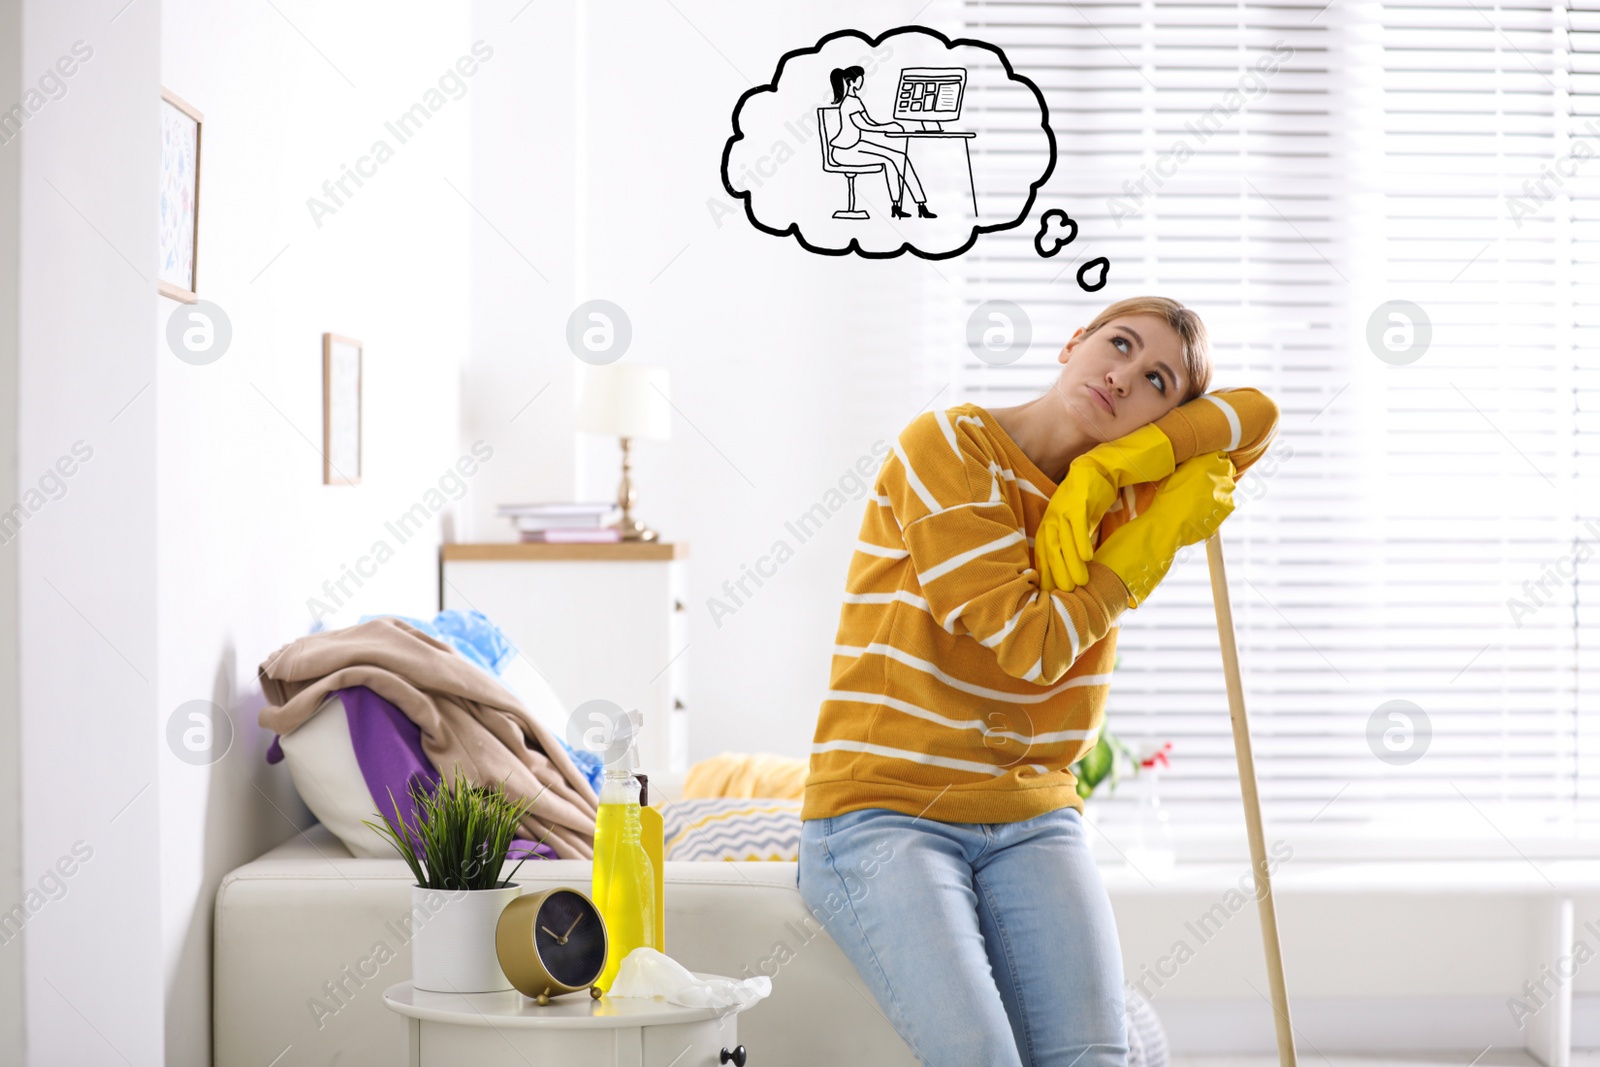 Image of Housewife dreaming about new job at home. Concept of balance between life and work